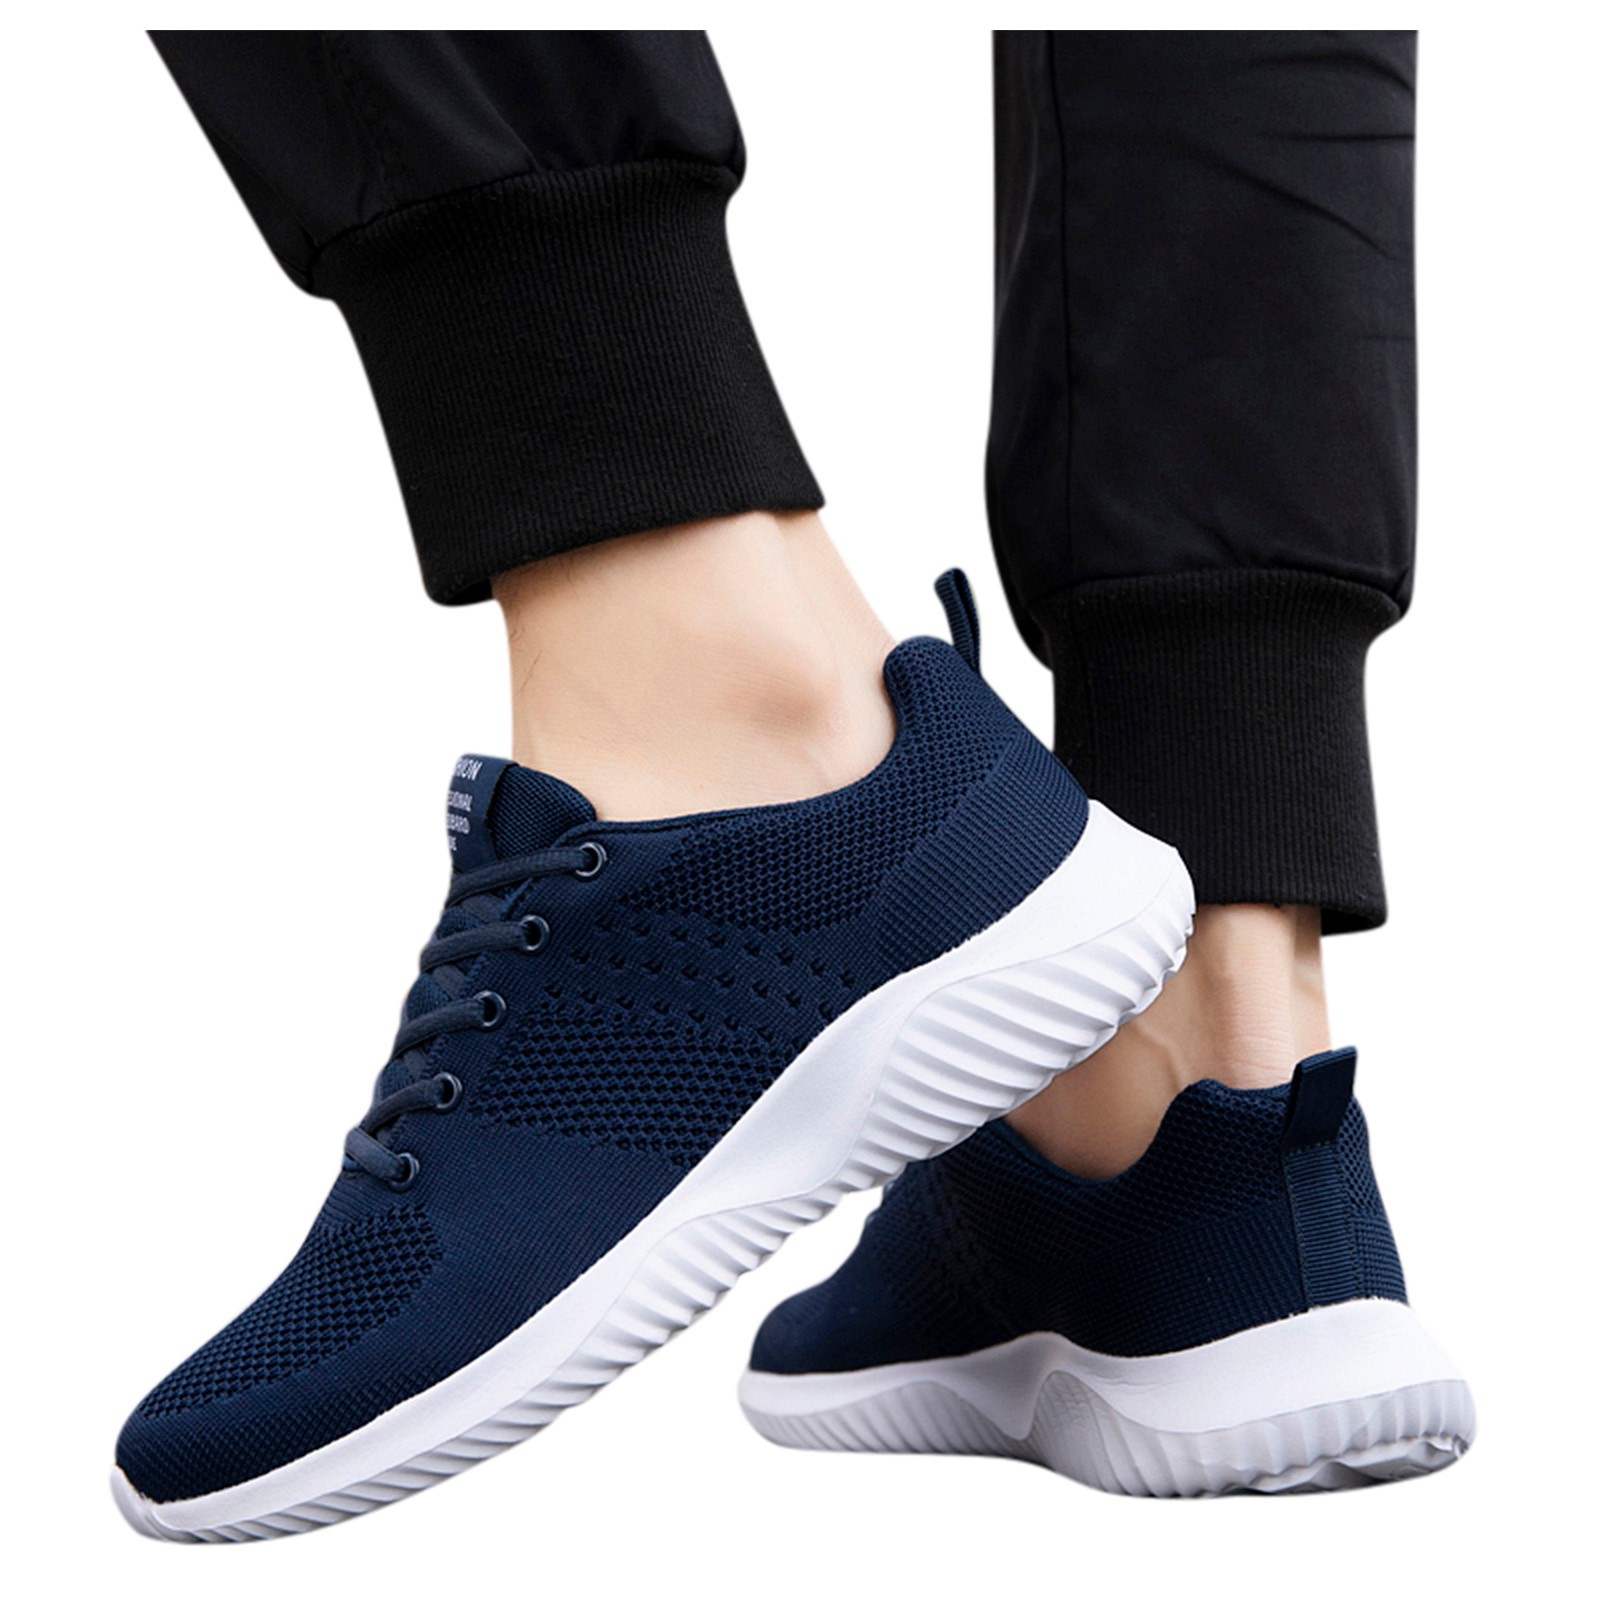 CBGELRT Shoes for Men Classic Men's Sneakers Tennis Shoes for Men Fashion Men Mesh Casual Sport Shoes Lace-up Breathable Soft Bottom Sneakers Male Blue 45 - image 3 of 9